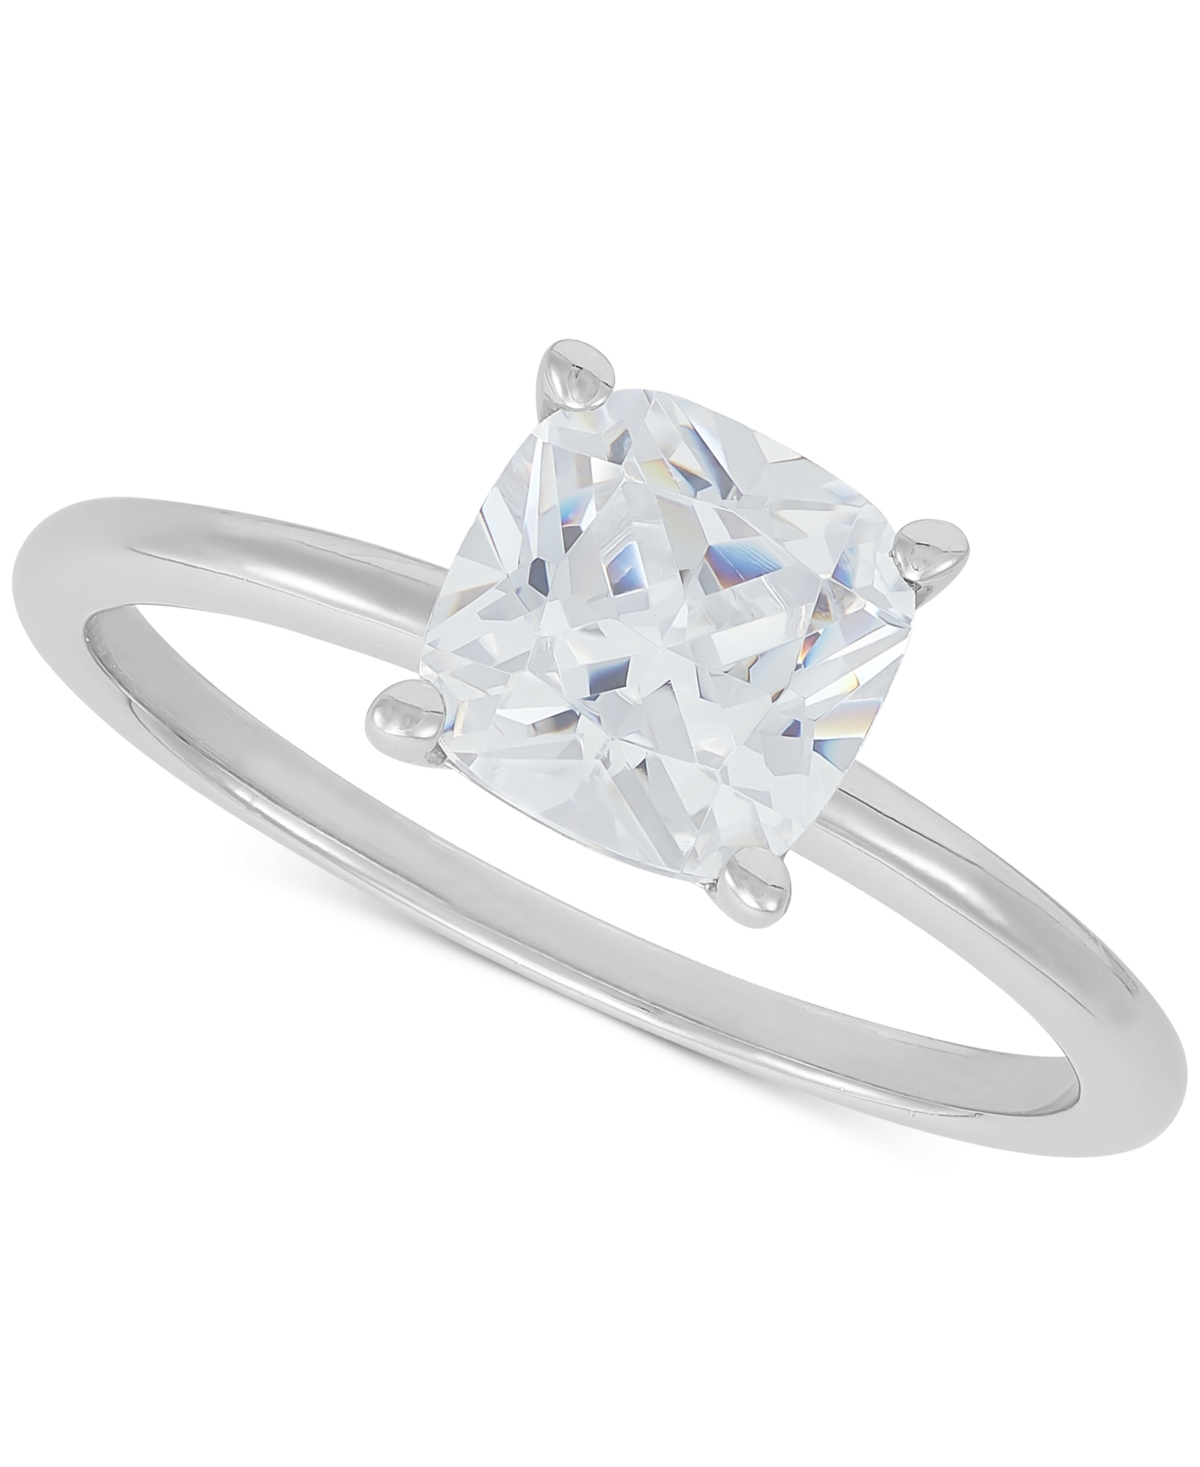 Grown With Love Igi Certified Lab Grown Diamond Cushion-Cut Ring (2 ct. t.w.) in 14k White Gold